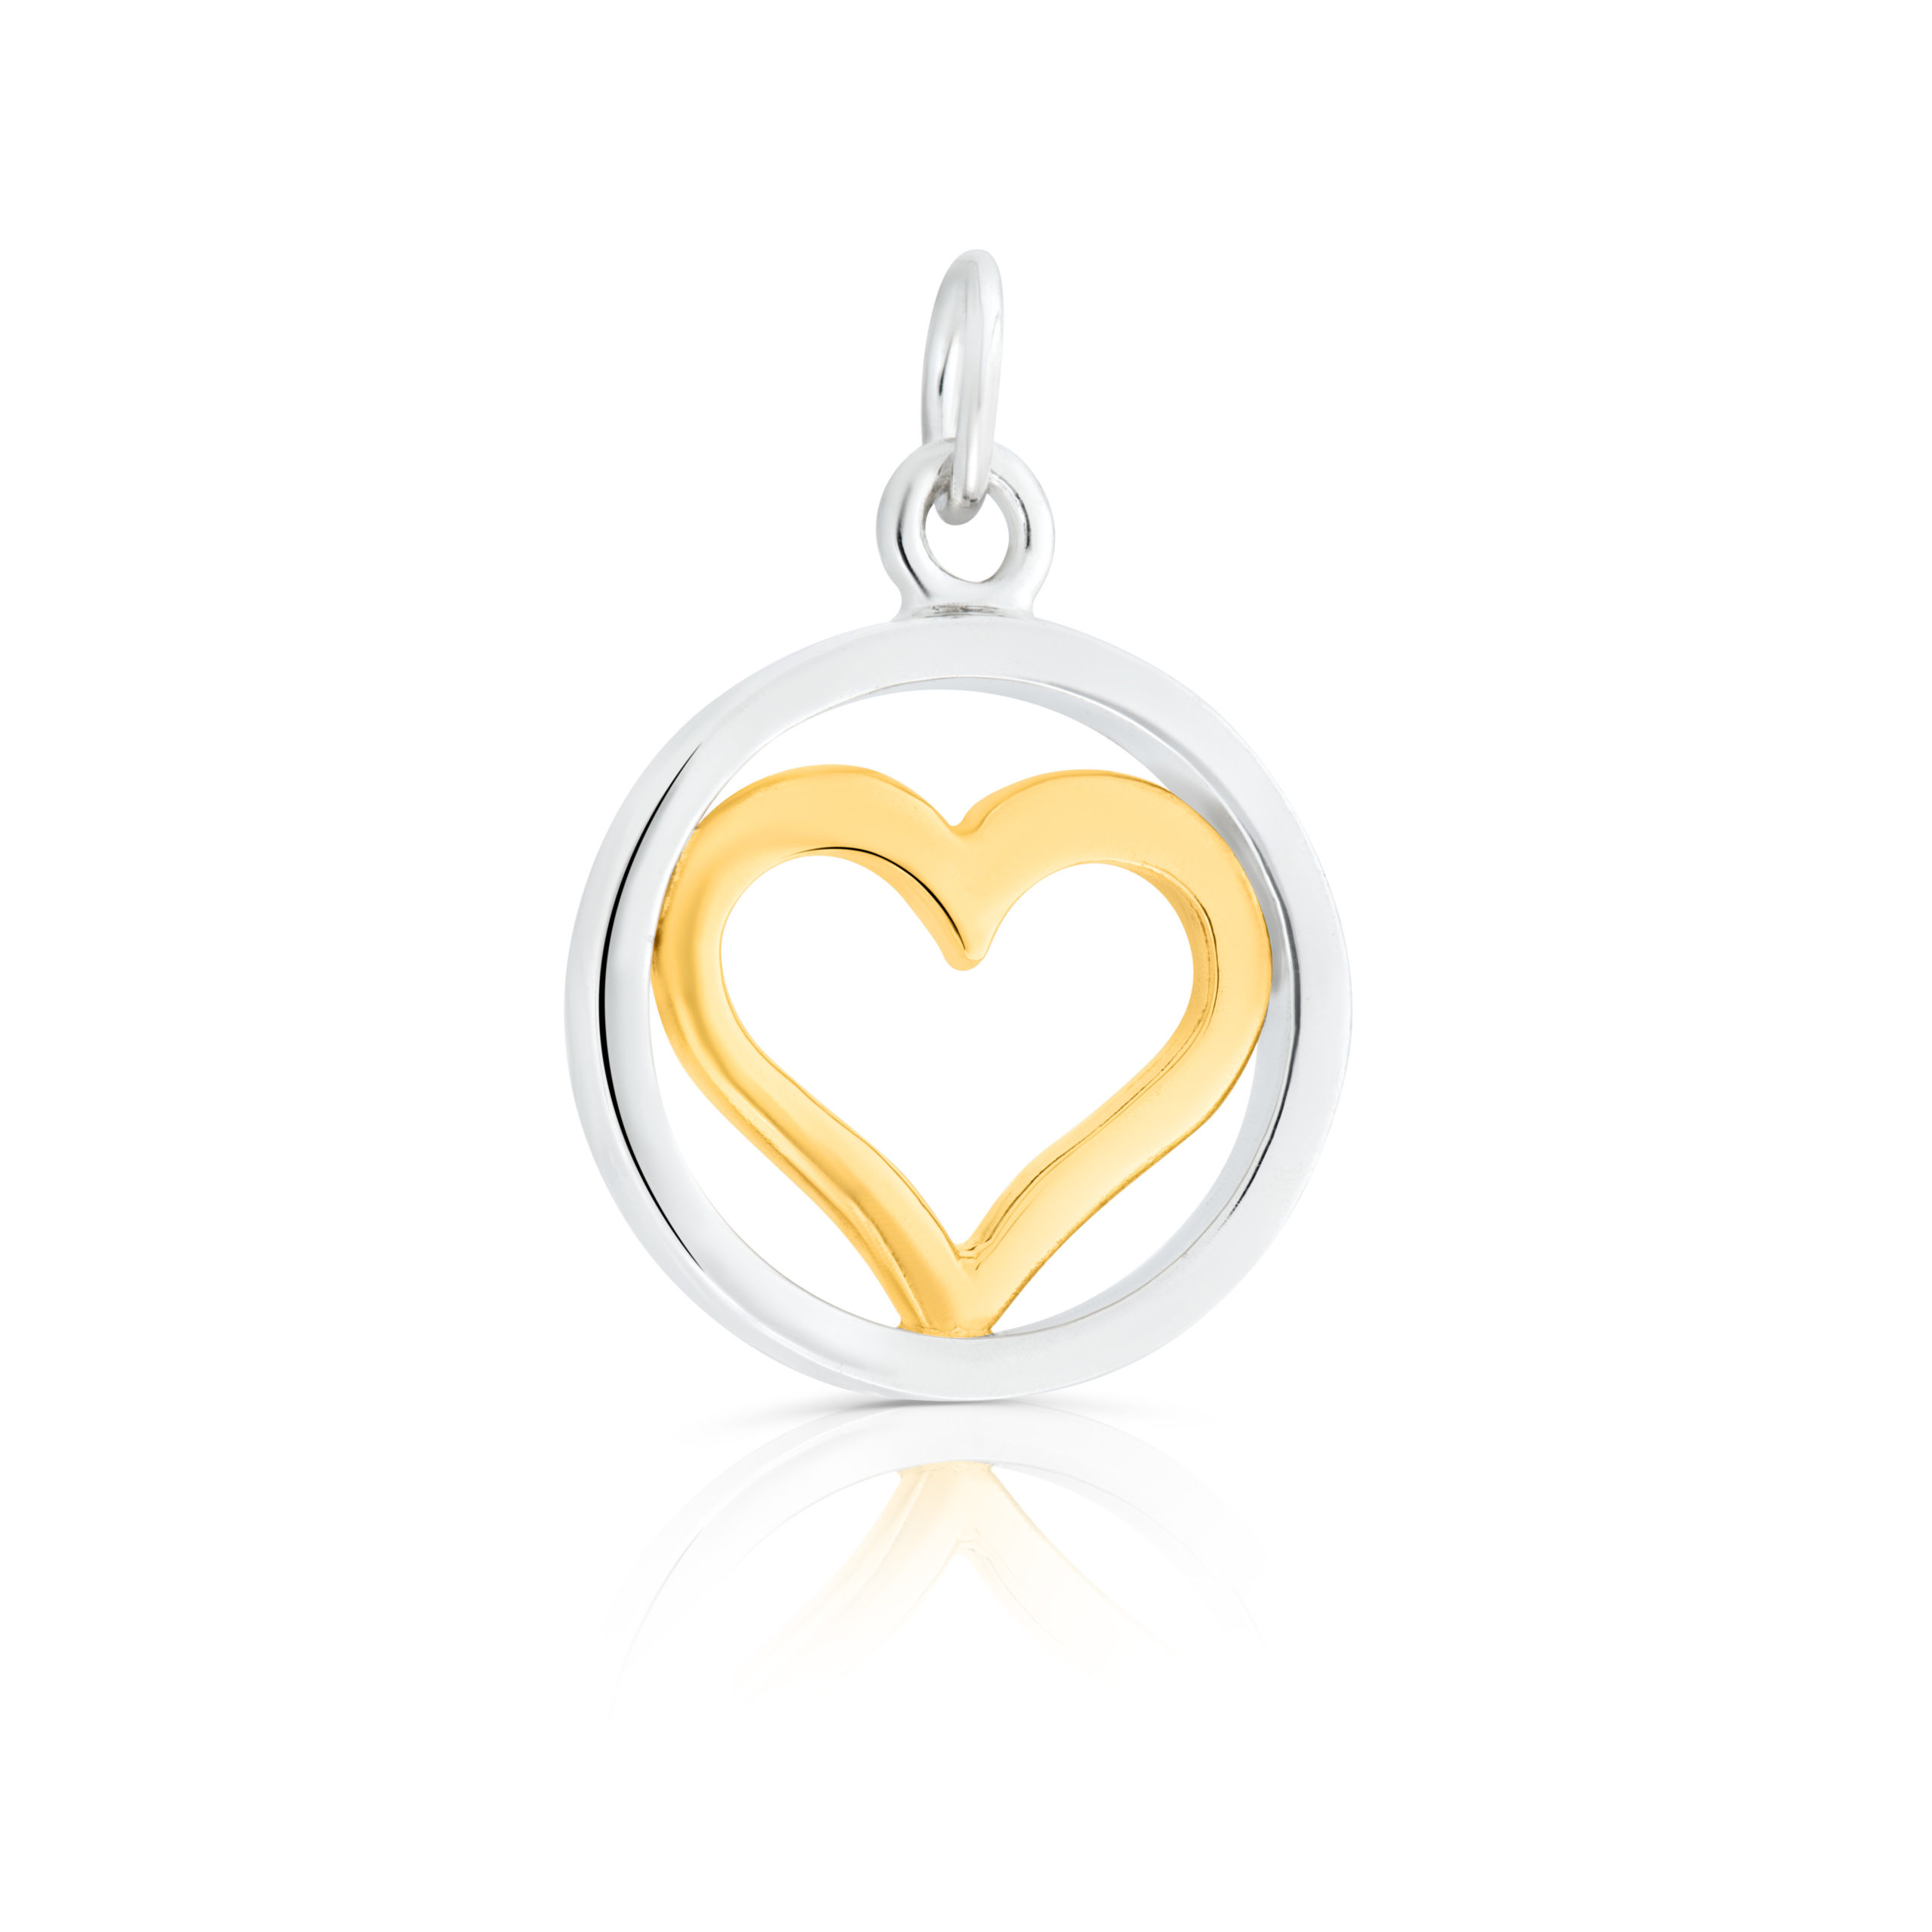 Sterling Silver & 9ct Yellow Gold Heart Charm / Pendant